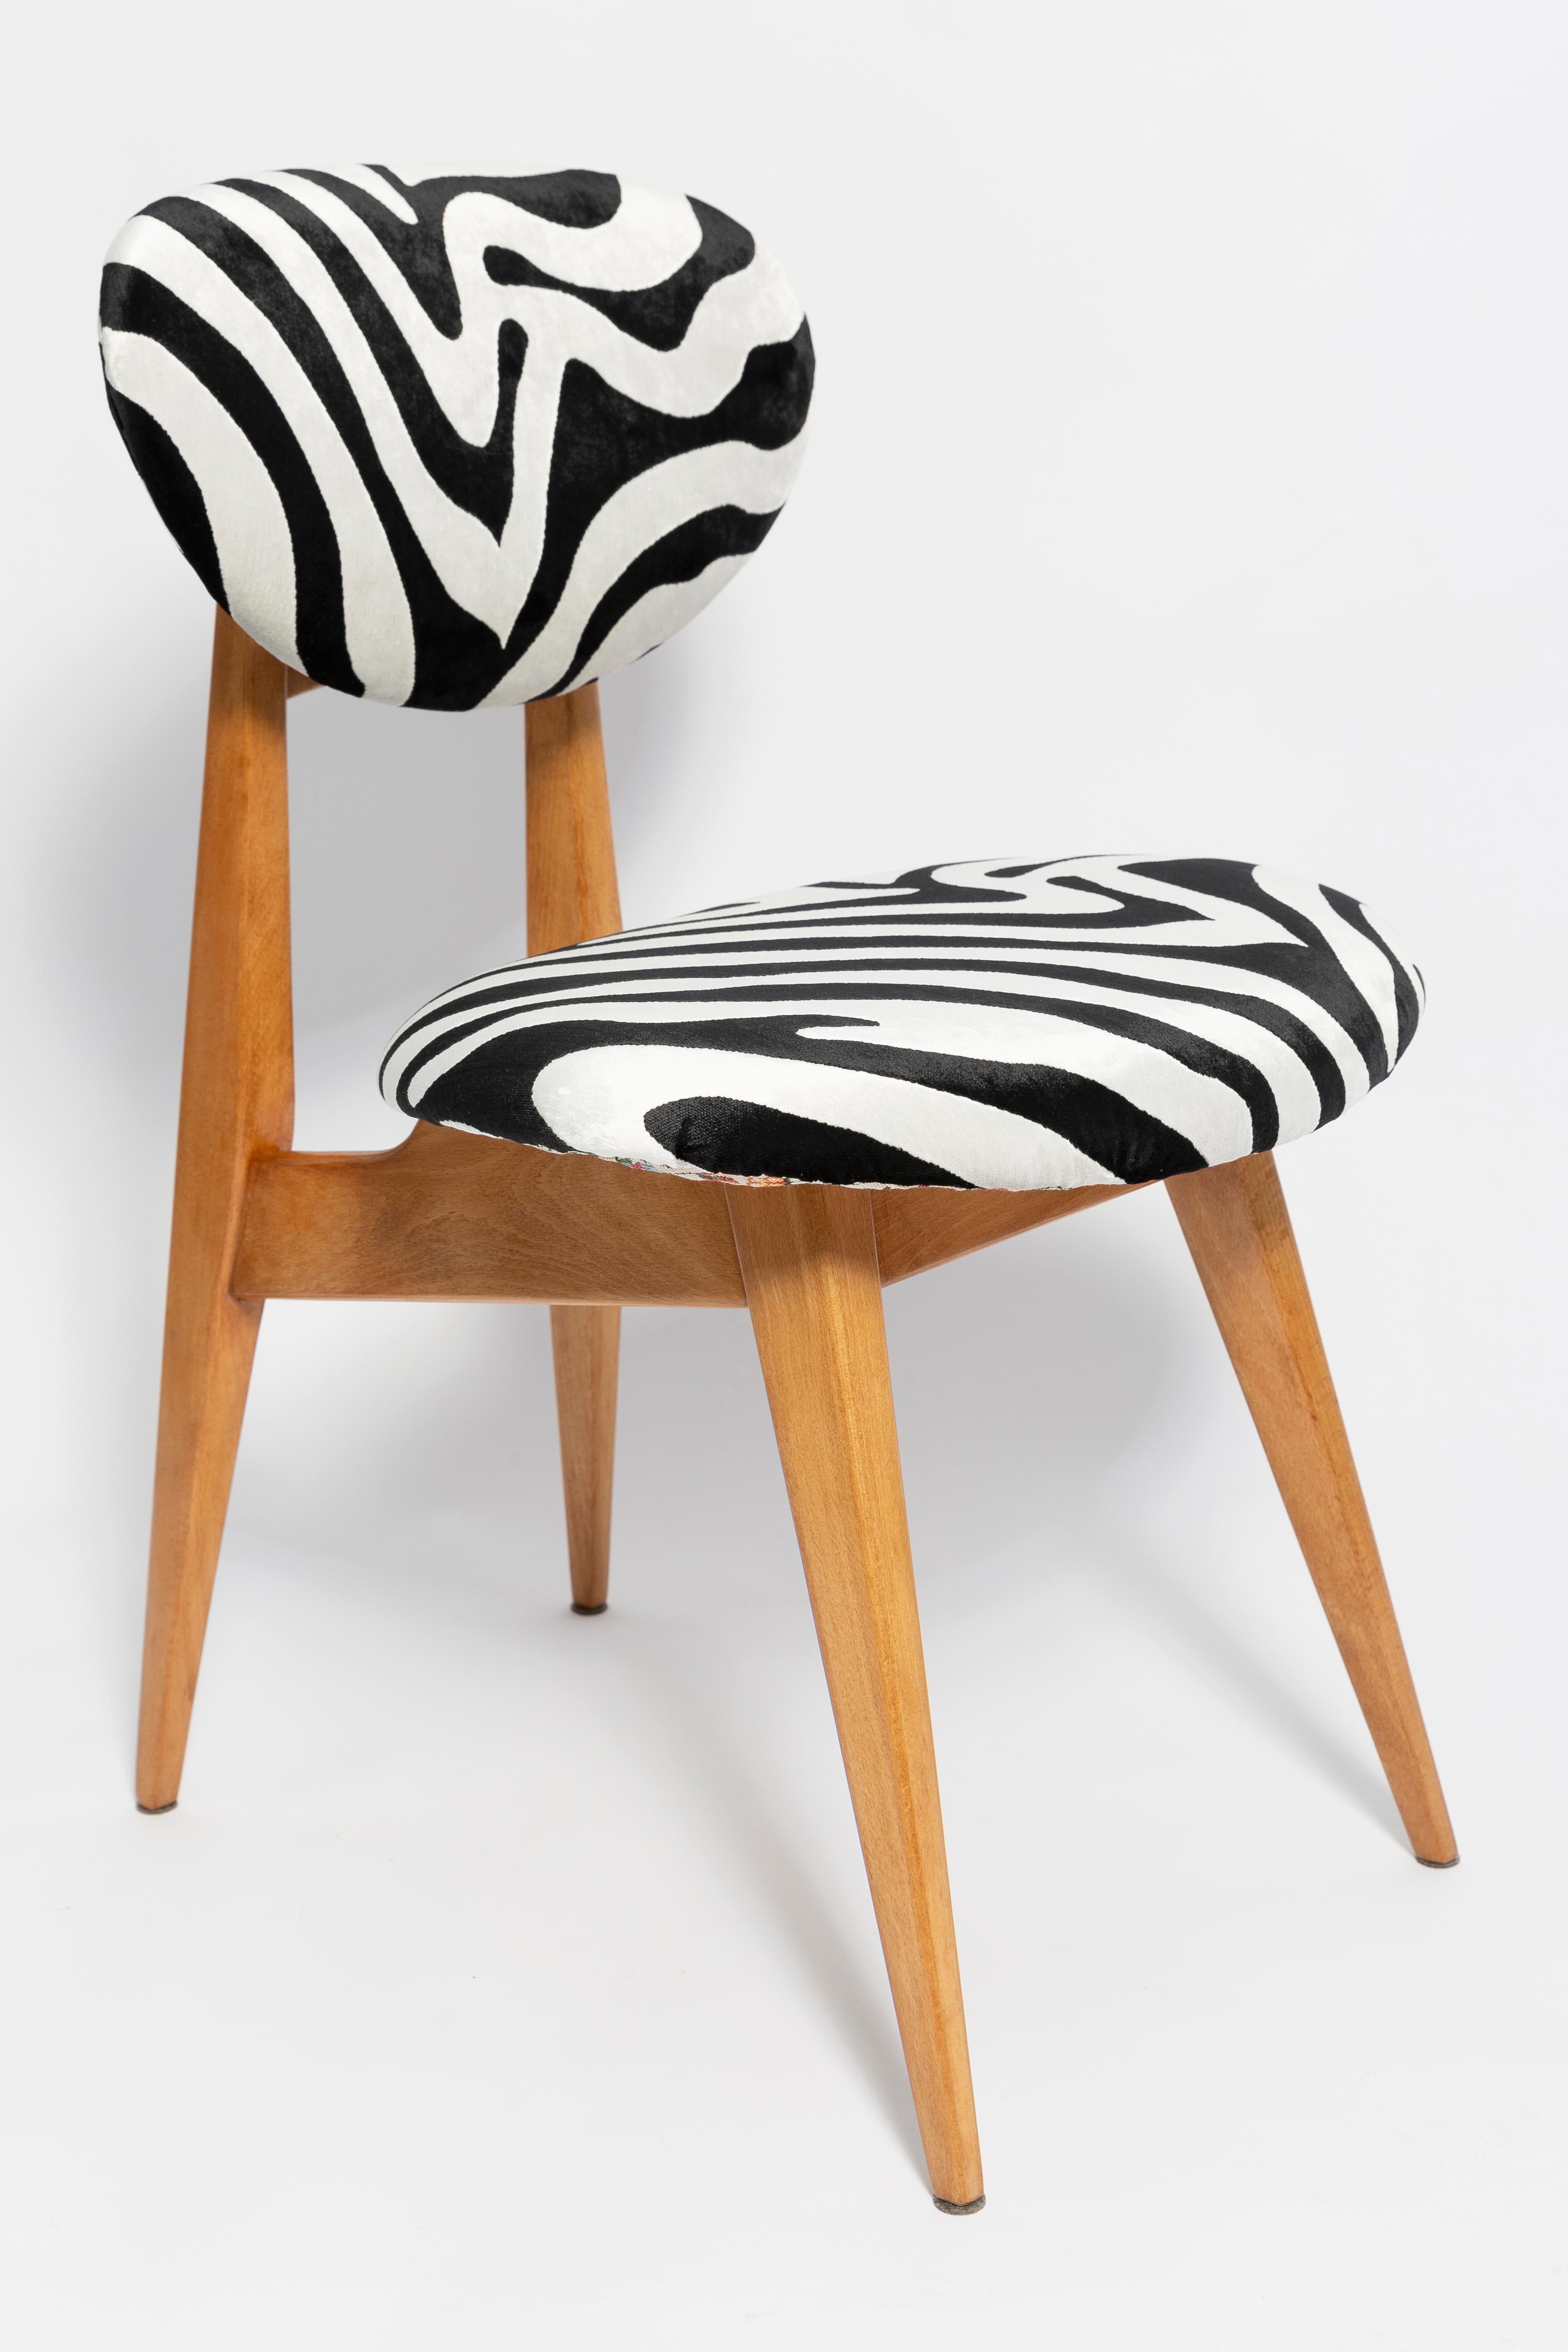 Hand-Crafted Set of Six Mid-Century Zebra Chairs, Type 200/128 by J. Kedziorek, Europe, 1960s For Sale